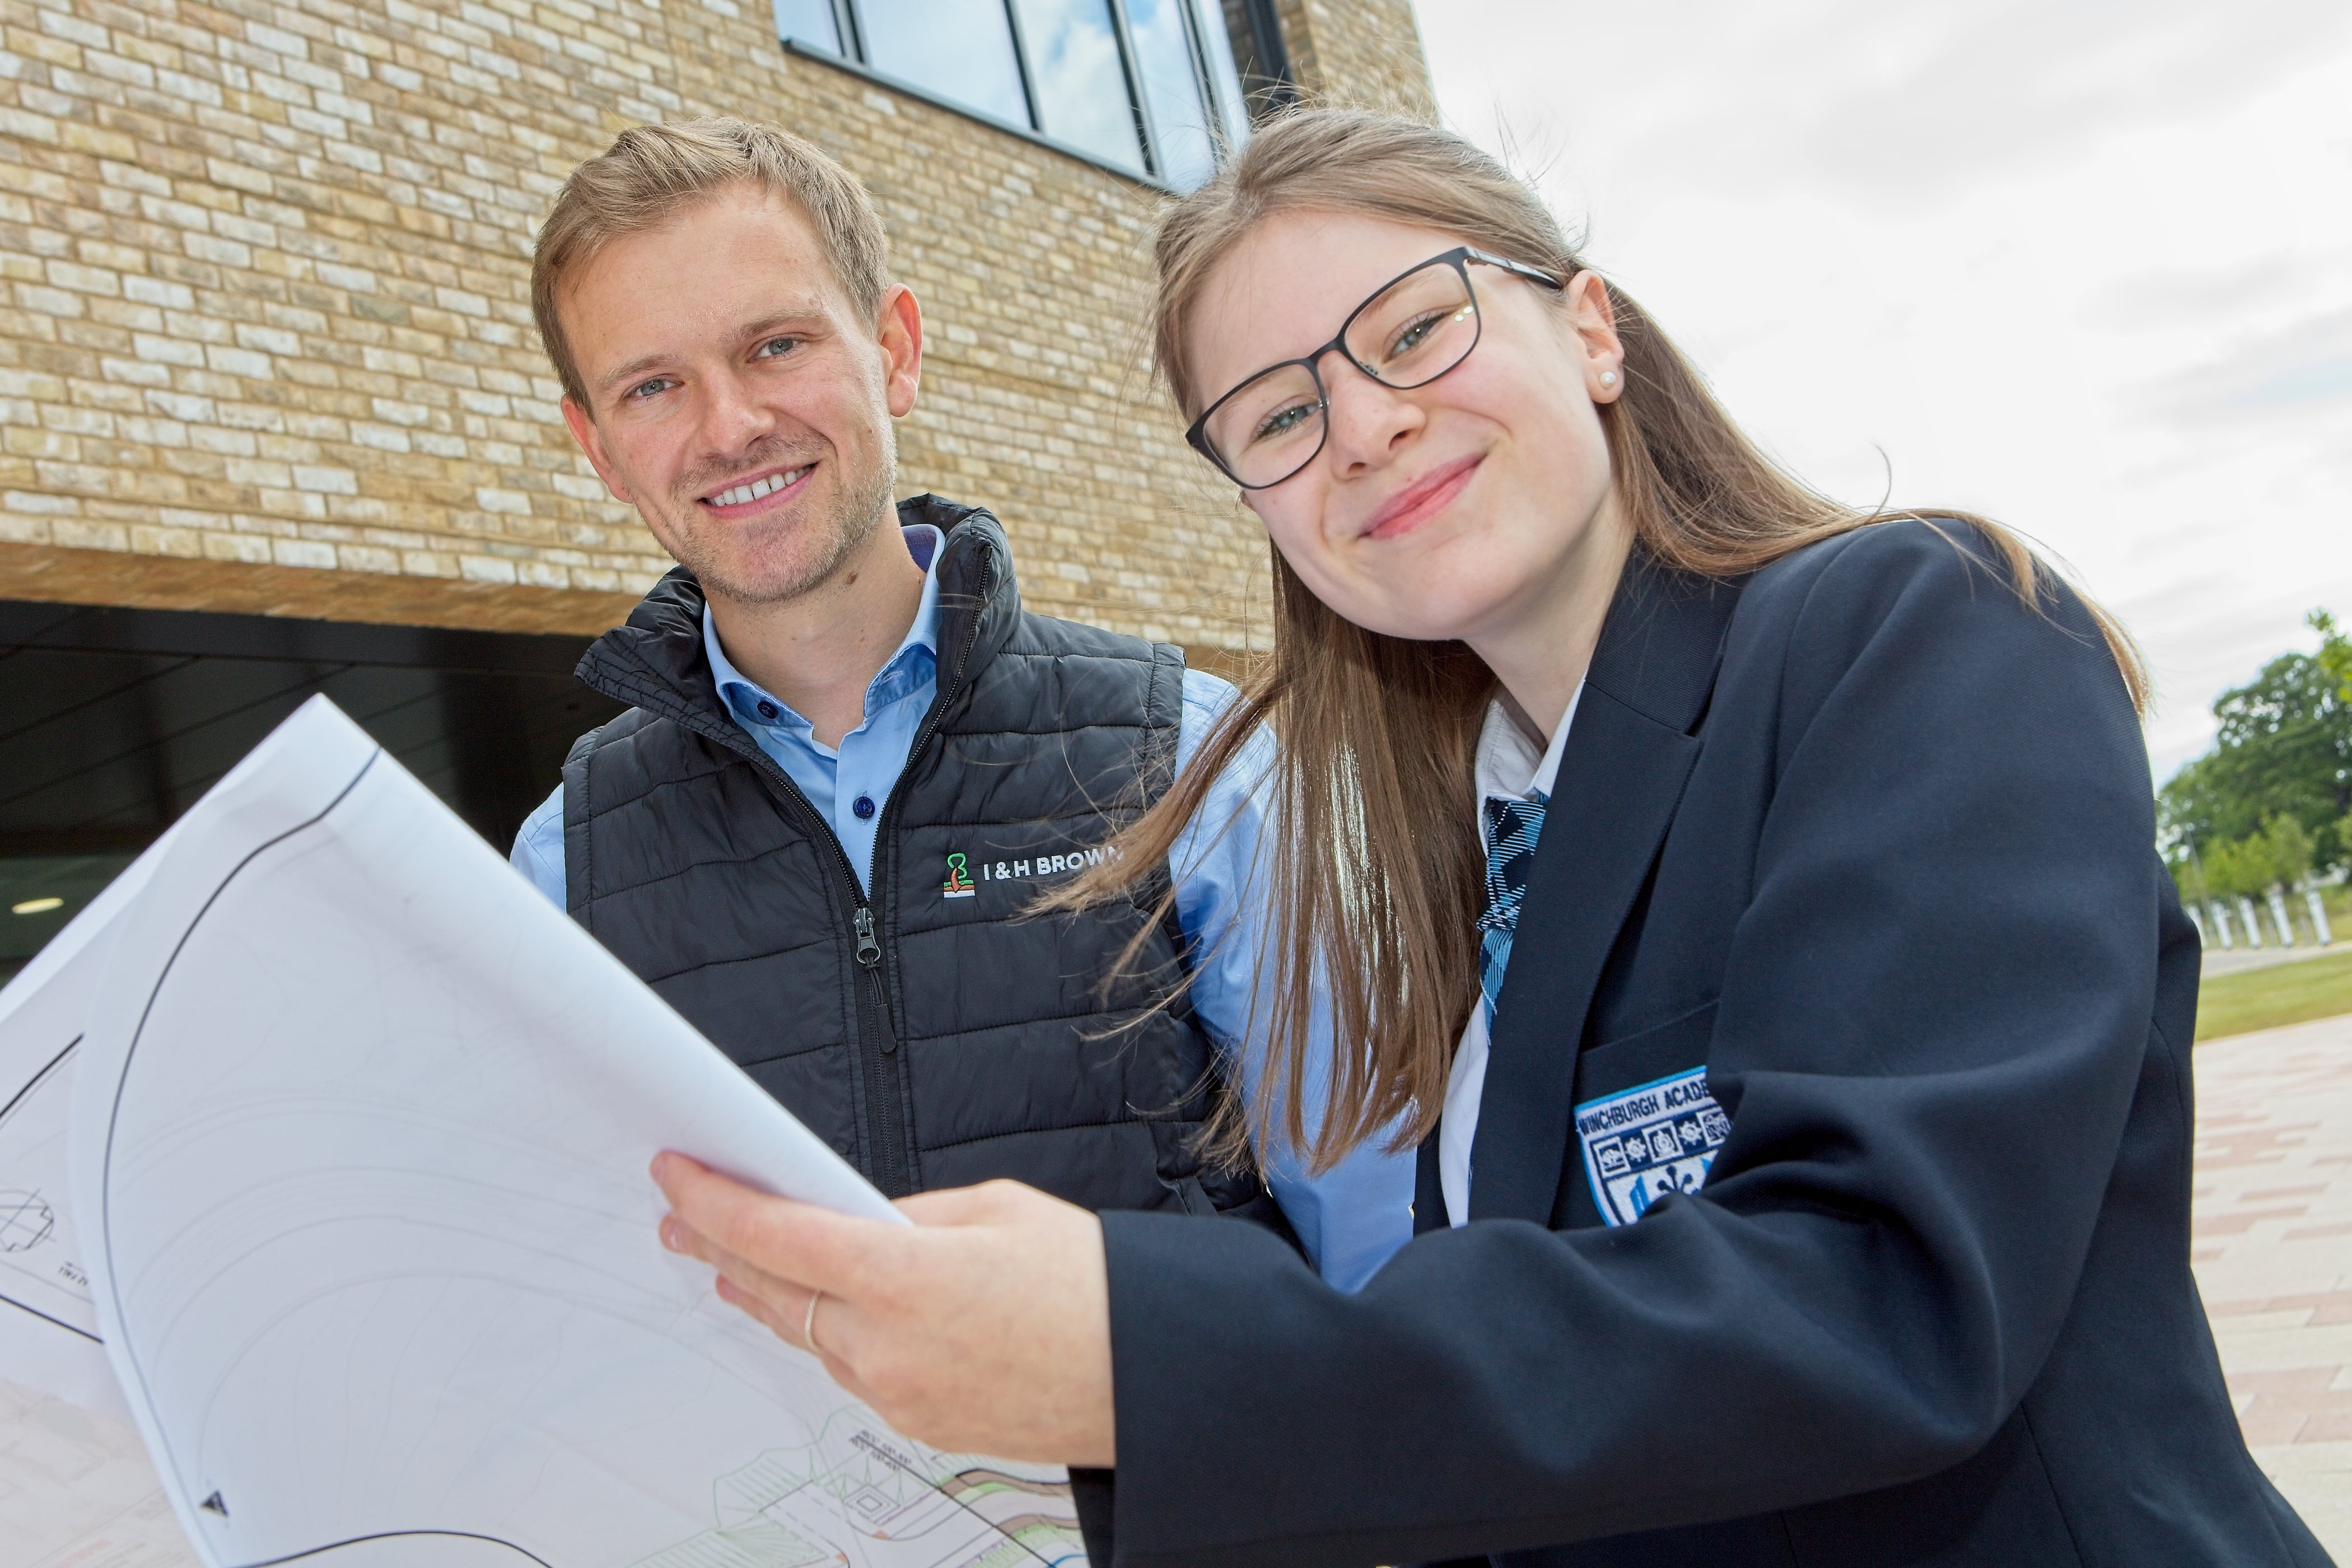 Secondary pupils work alongside developers to gain valuable careers insight